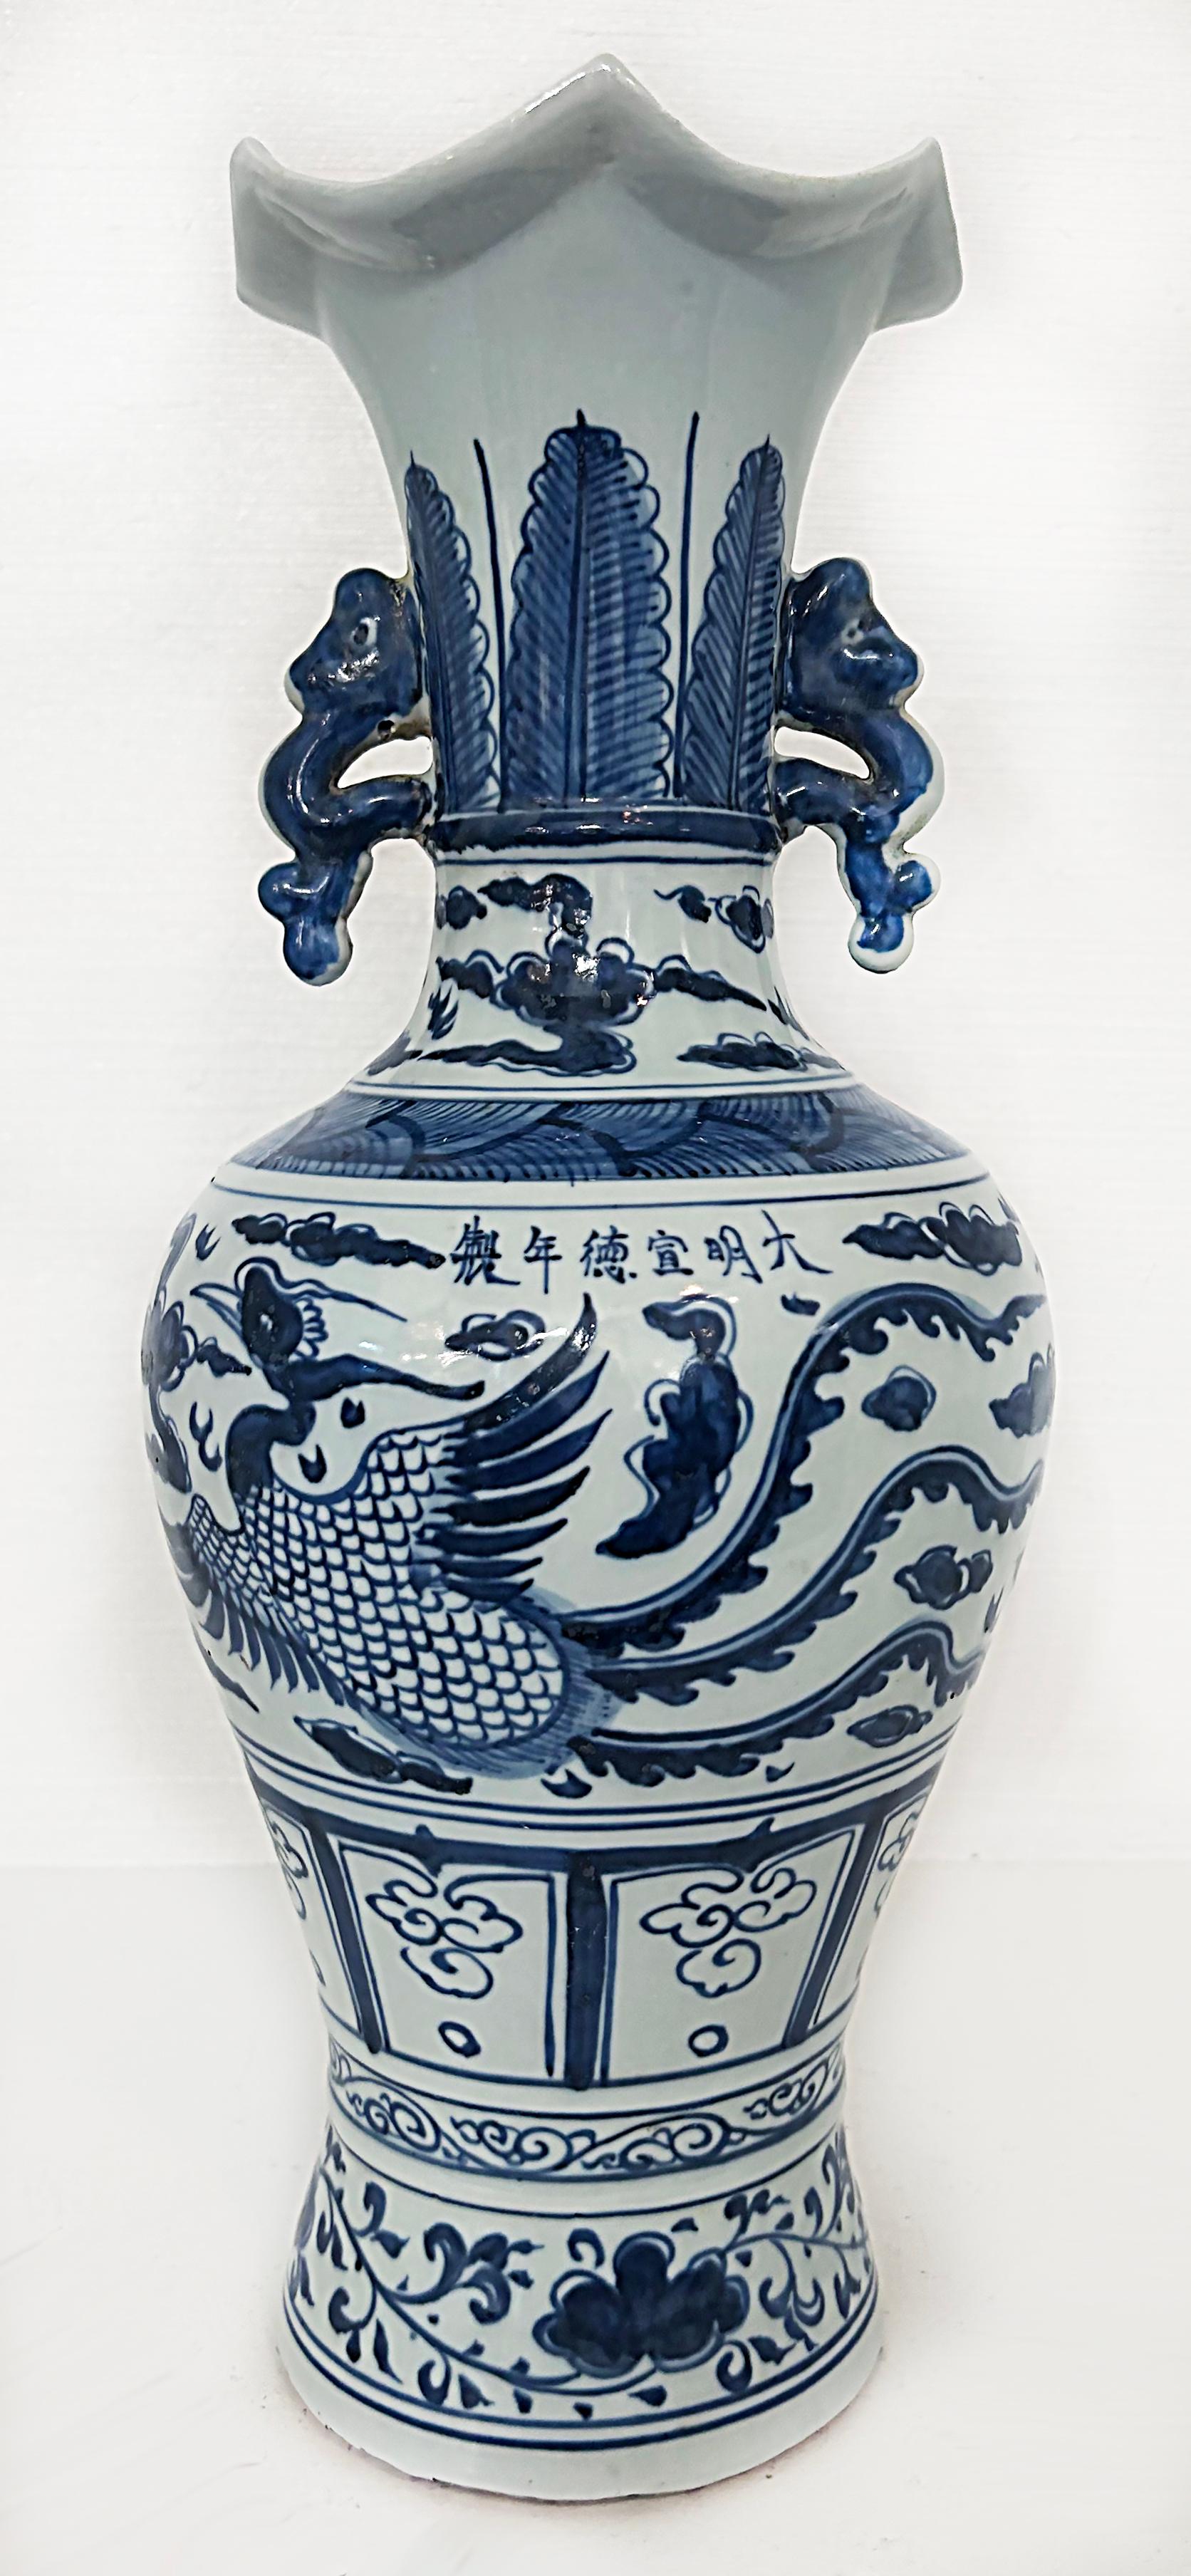 Chinese Blue and White Phoenix Bird Vases with Handles, Artist Signed 

Offered for sale is a fine pair of Chinese blue and white hand-painted, artist-signed two-handled vases depicting phoenix birds. This pair of tall vases are signed on the body